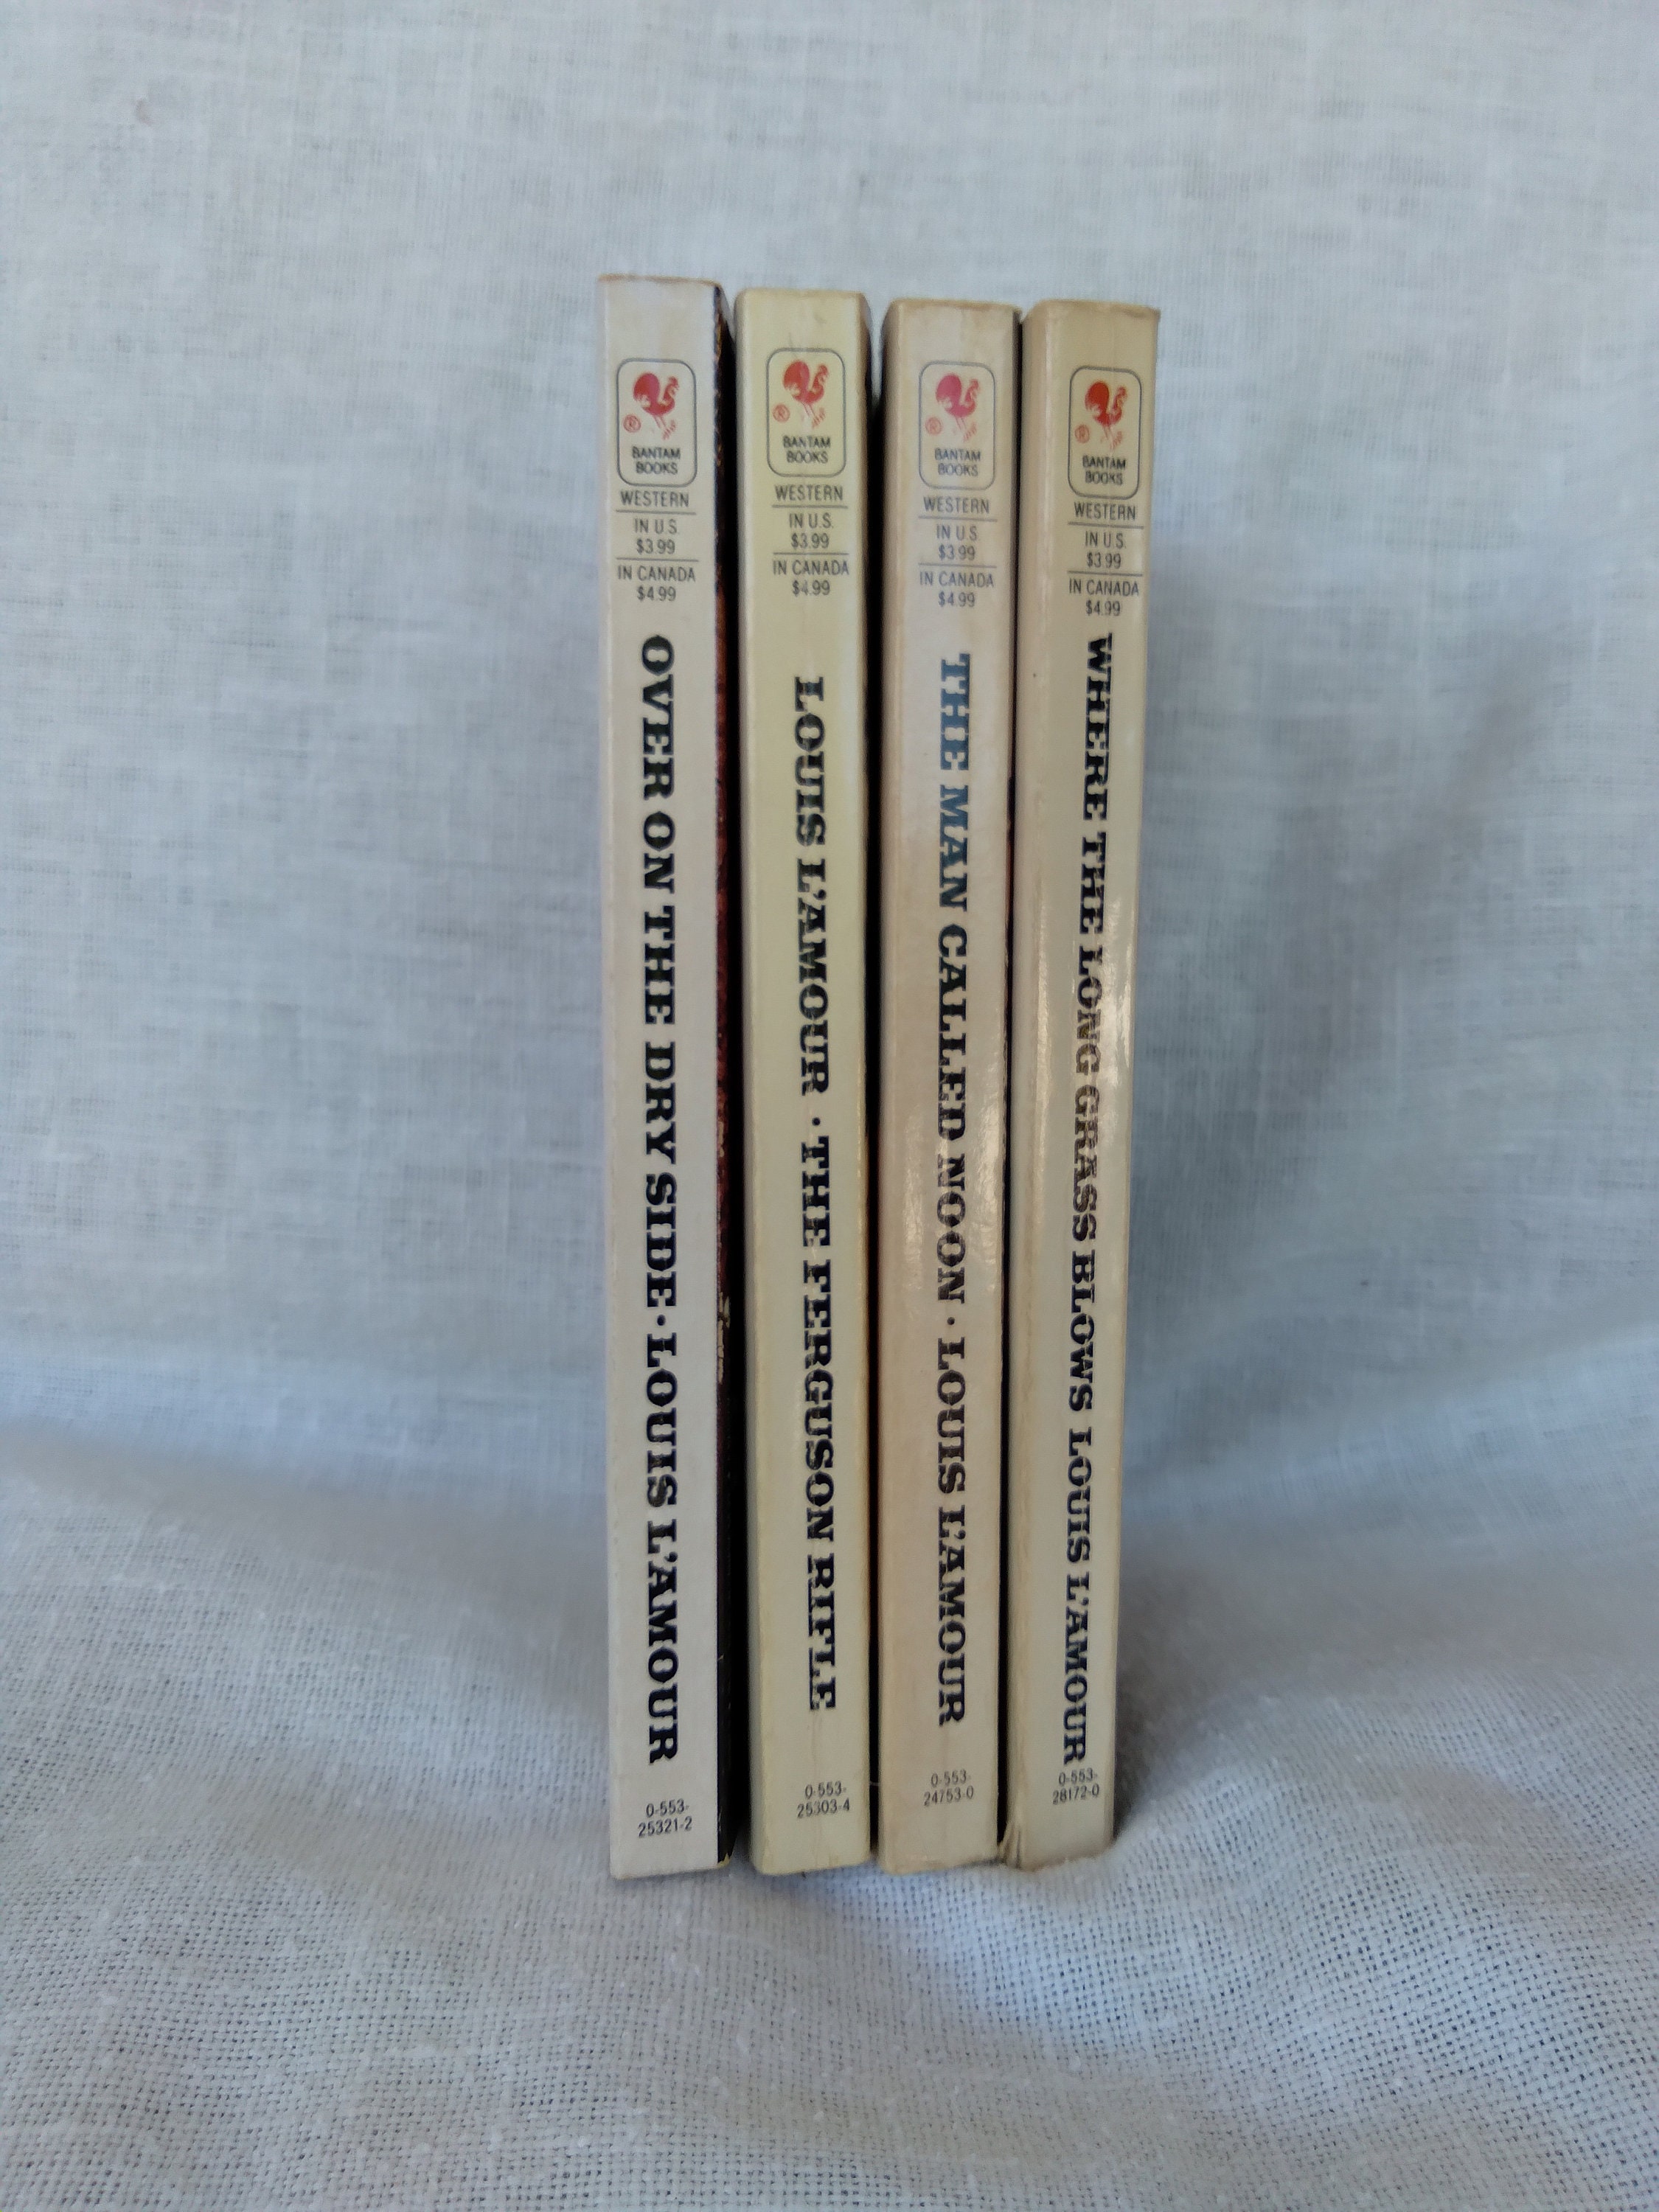 Louis L'Amour Western Collection Audiobook 4 CD Set in Wood Box Willie  Nelson 9781598875447